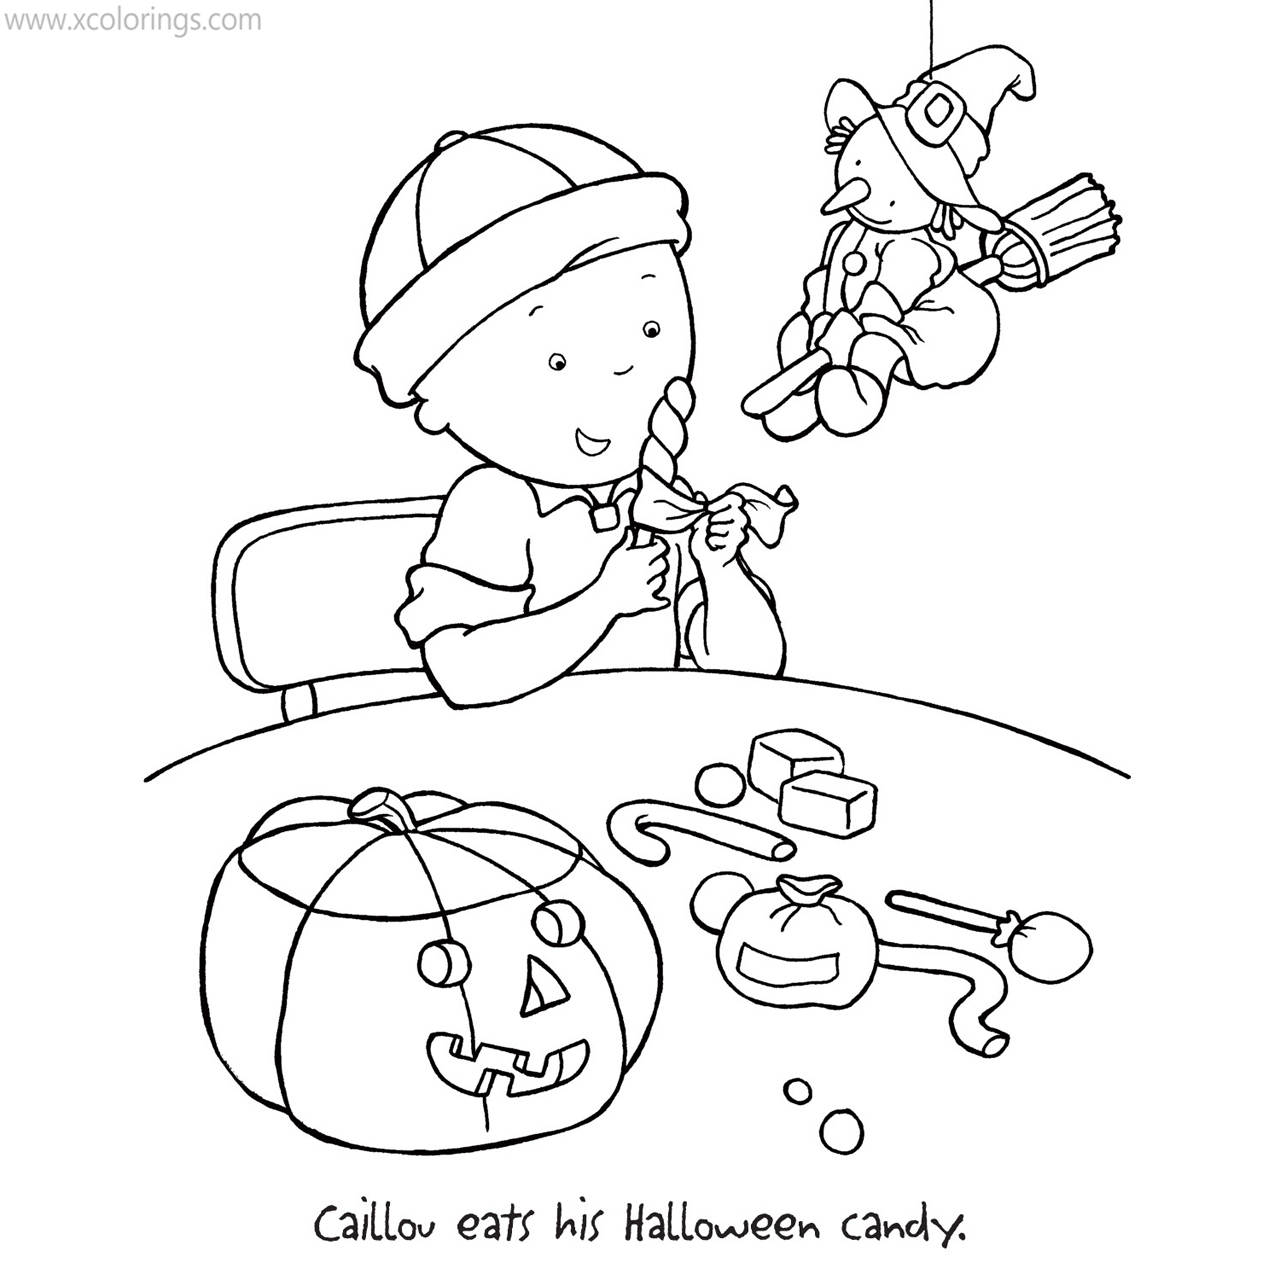 Free Caillou Halloween Coloring Pages printable